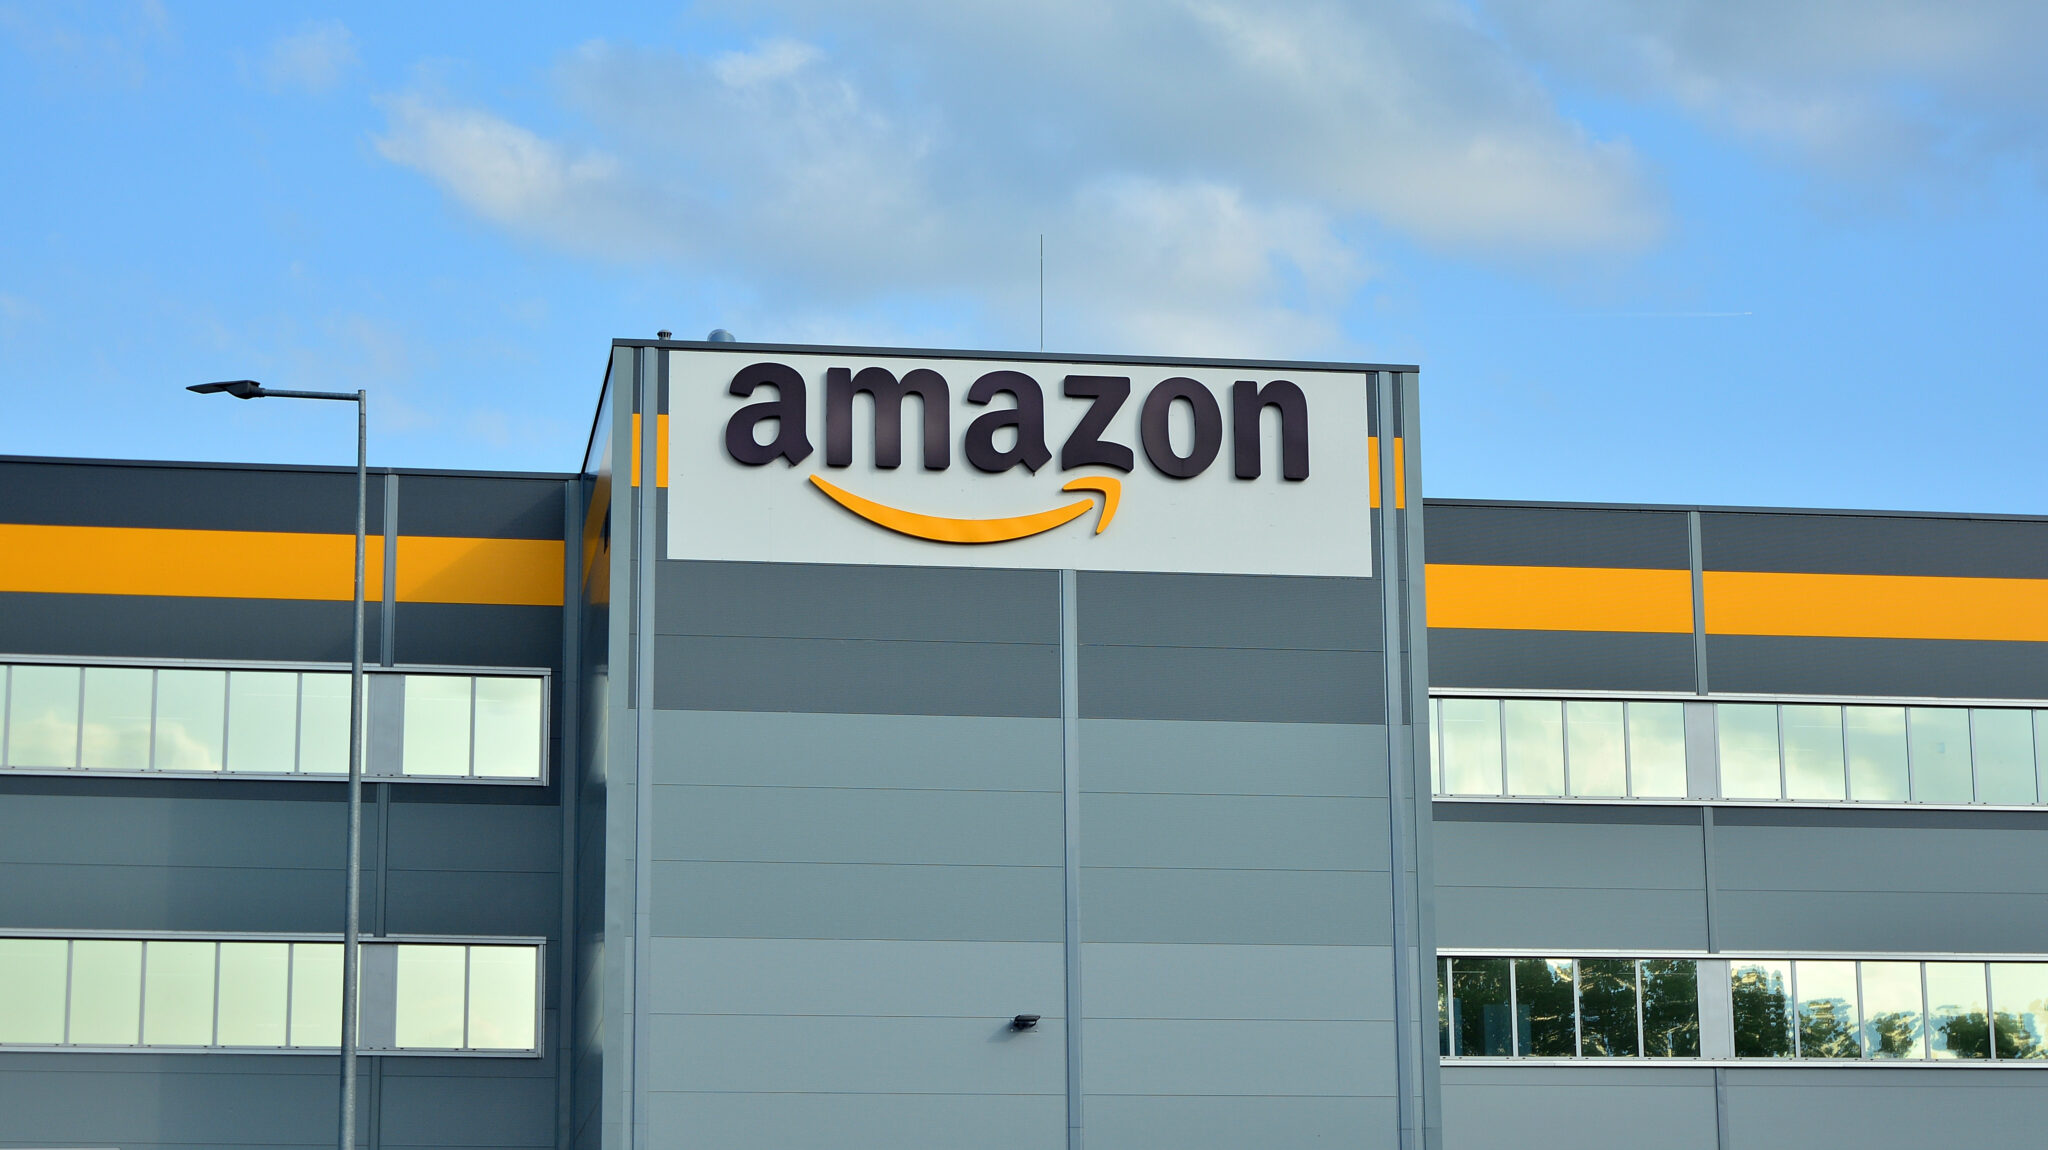 Amazon to lay off 18,000 people in cost cutting move DeliveryX